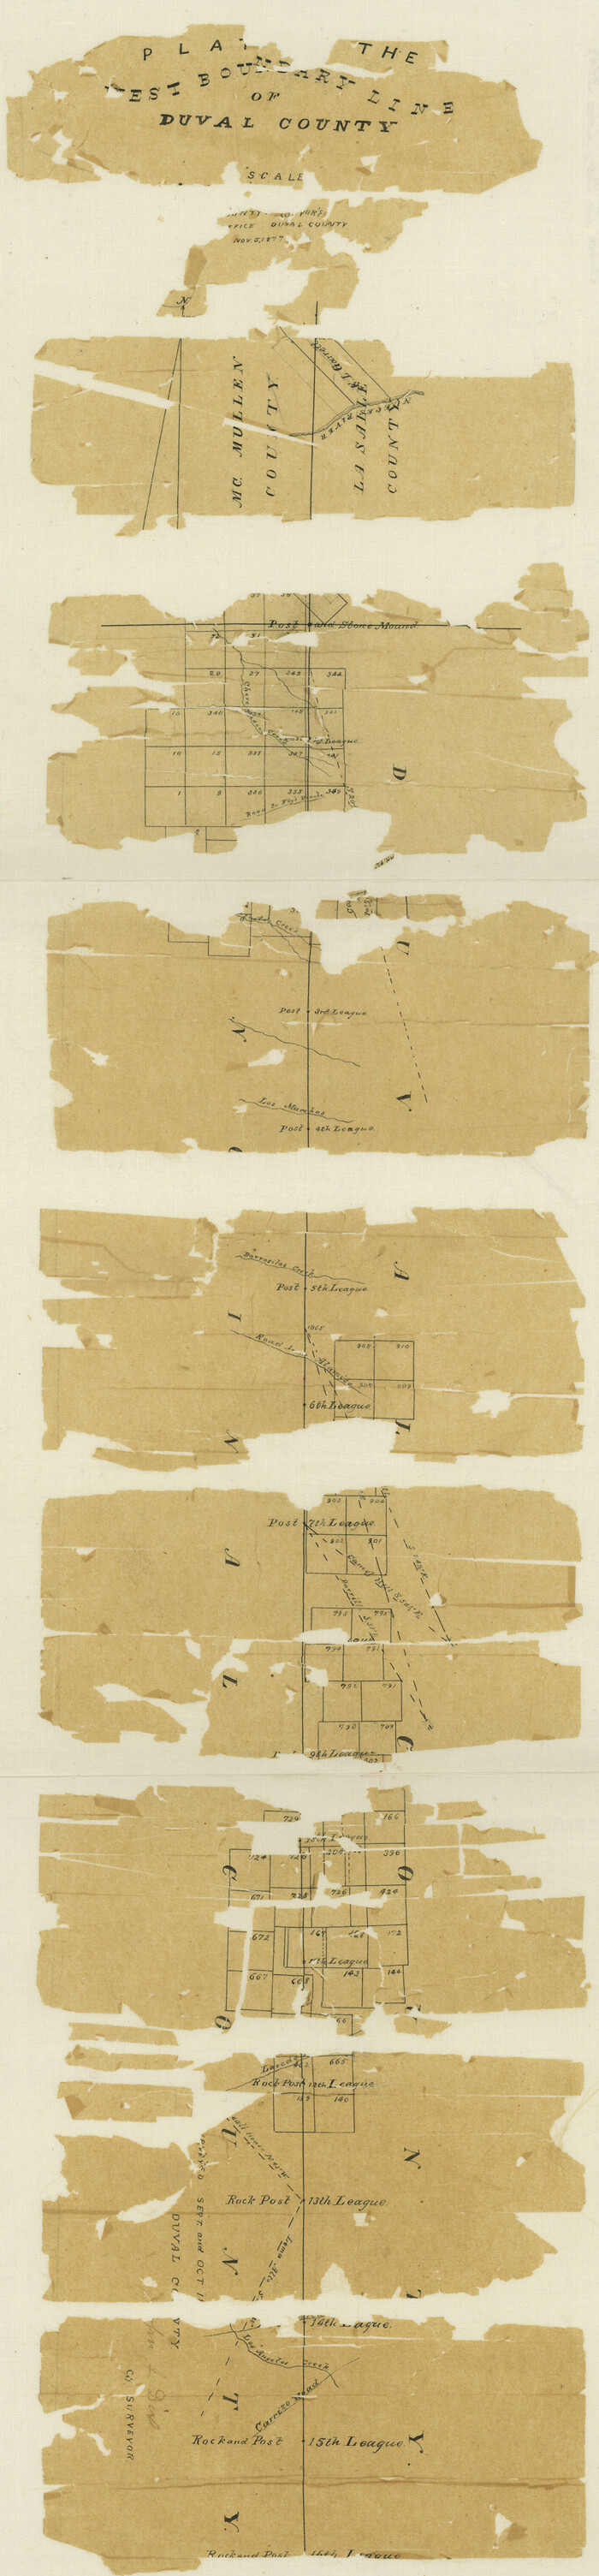 52759, Duval County Boundary File 3k, General Map Collection